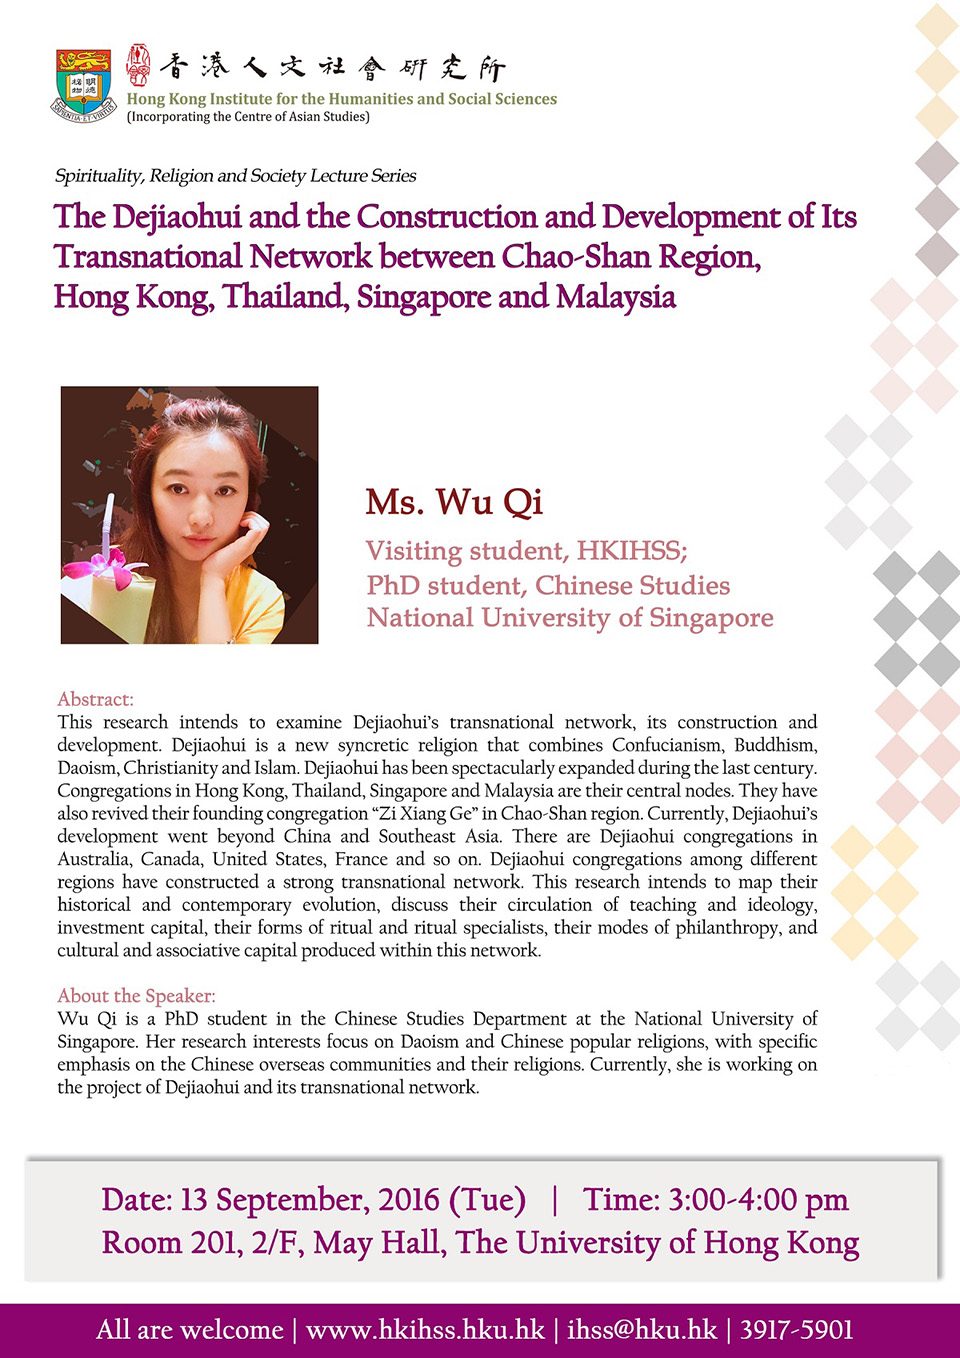 Spirituality, Religion and Society Lecture Series “The Dejiaohui and the Construction and Development of Its Transnational Network between Chao-Shan Region, Hong Kong, Thailand, Singapore and Malaysia” by Ms. Qi Wu